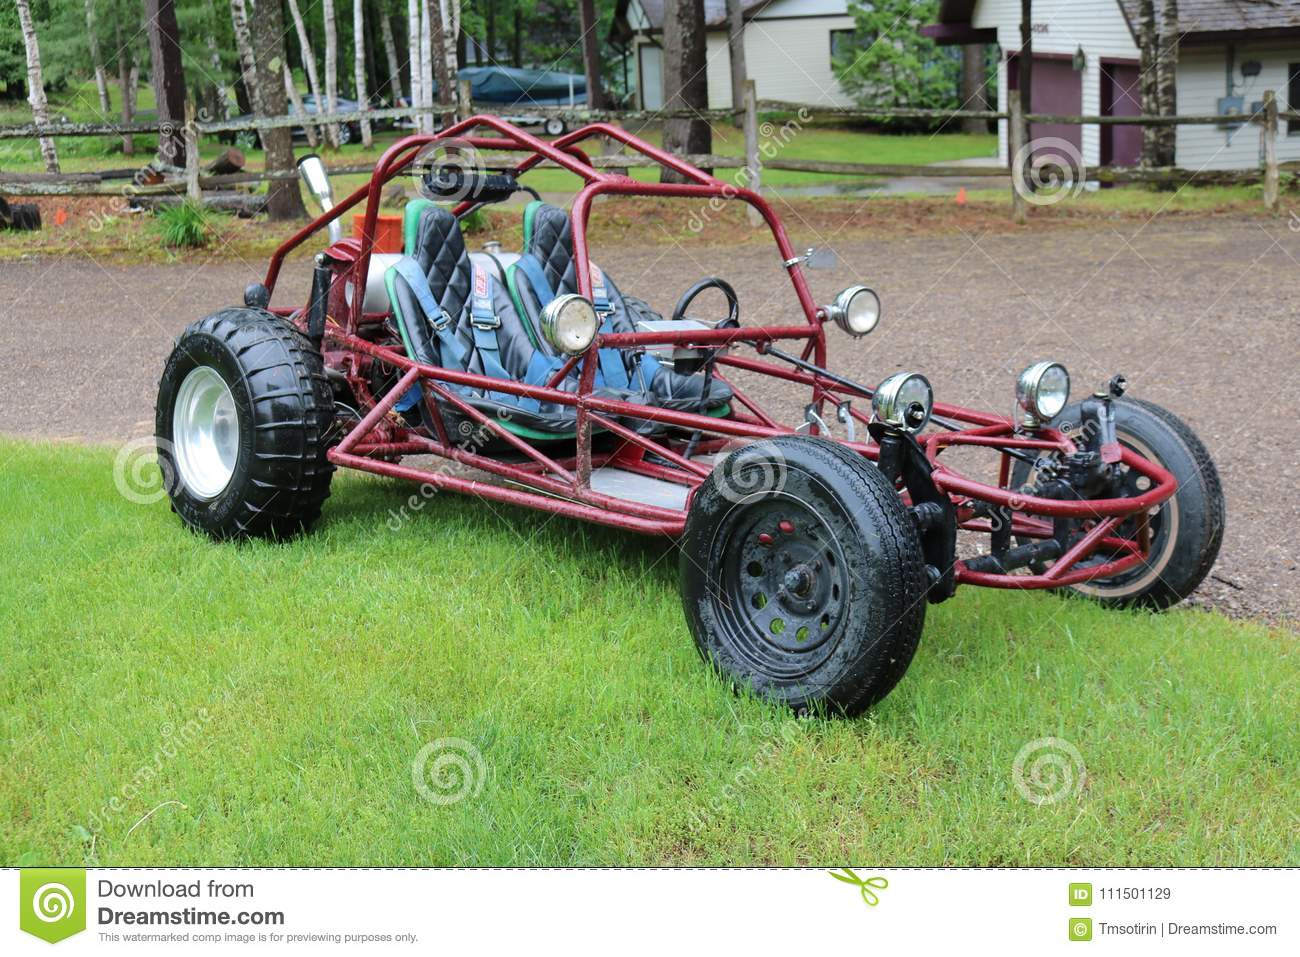 dune buggy plans free download